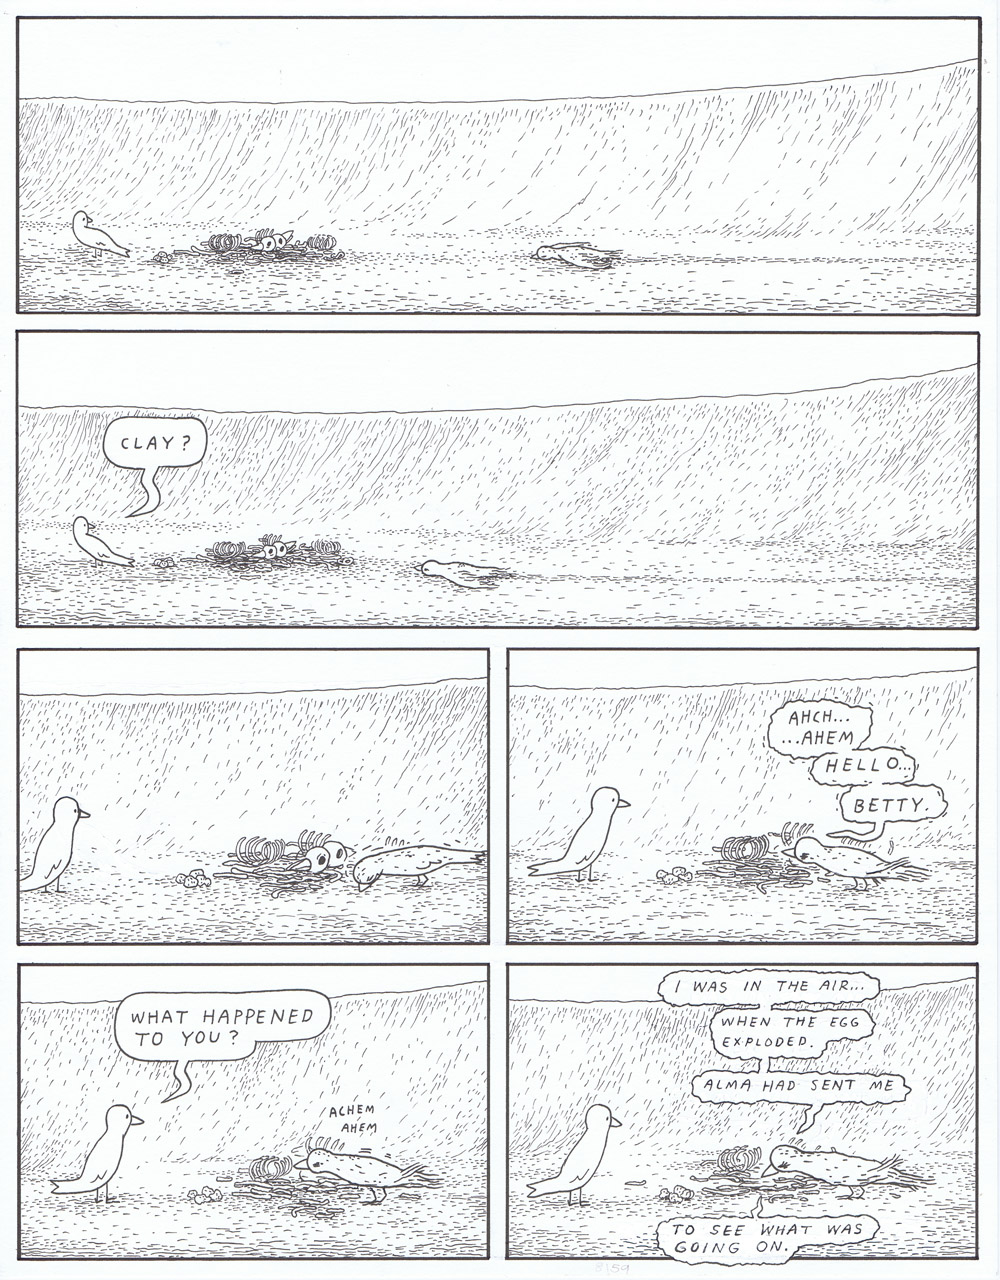 Big Questions - page 411-412 various panels